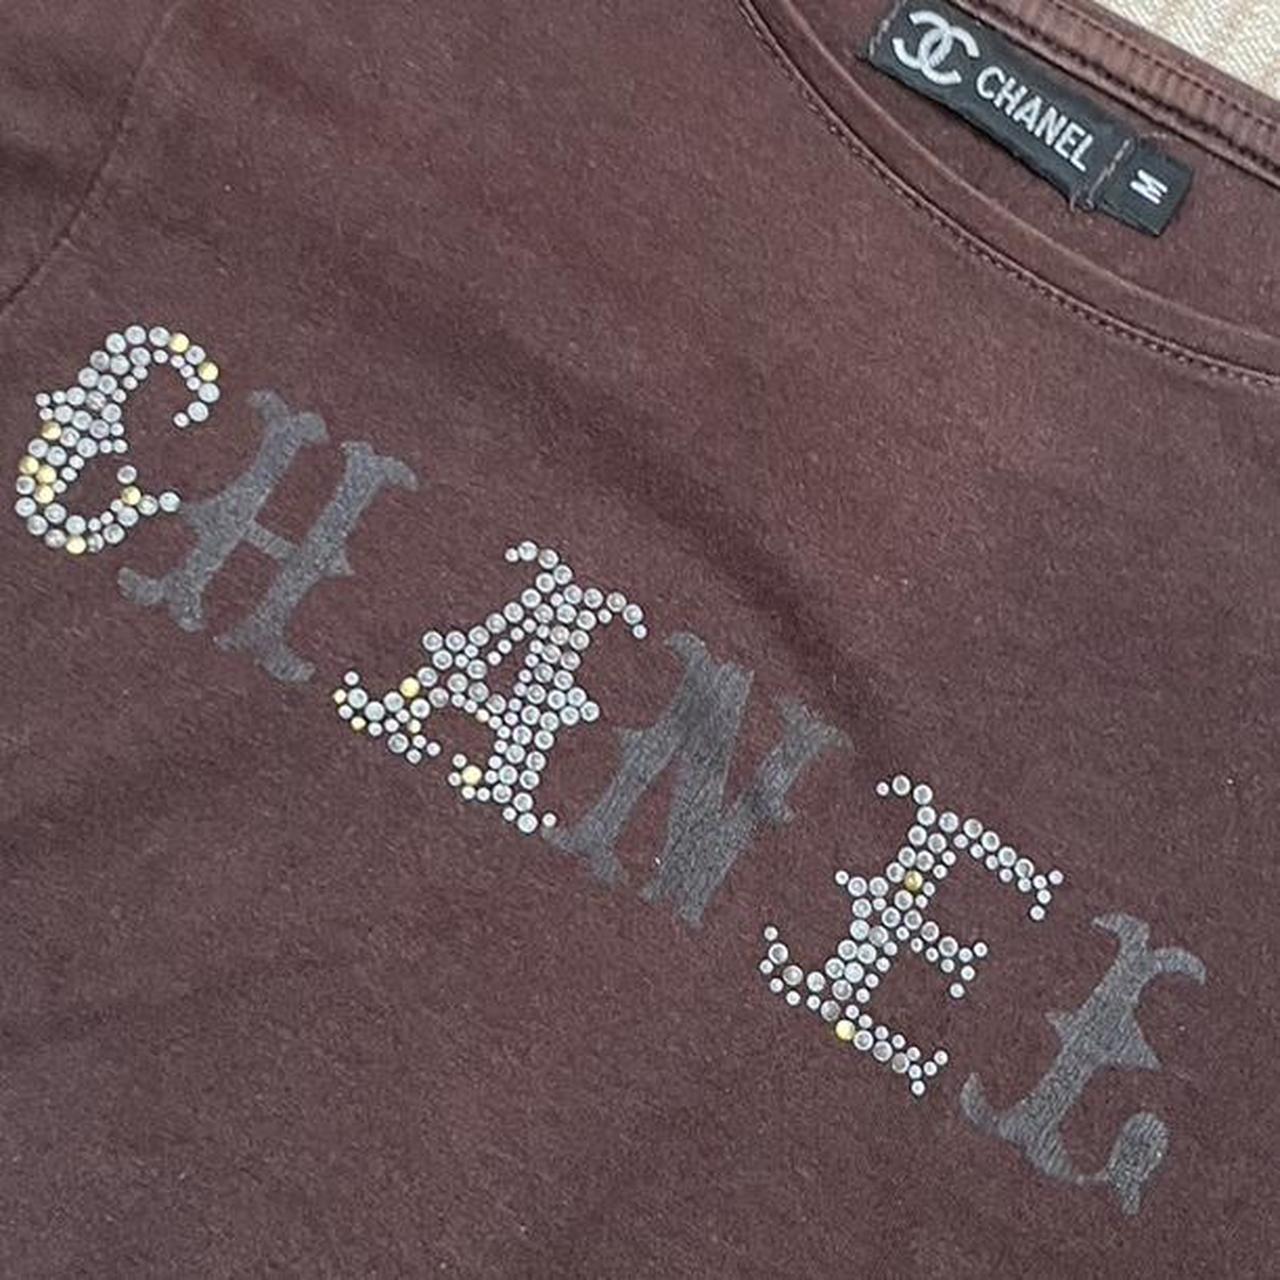 Vintage Chanel Paris T Shirt Red Embroidery Big Logo 90s